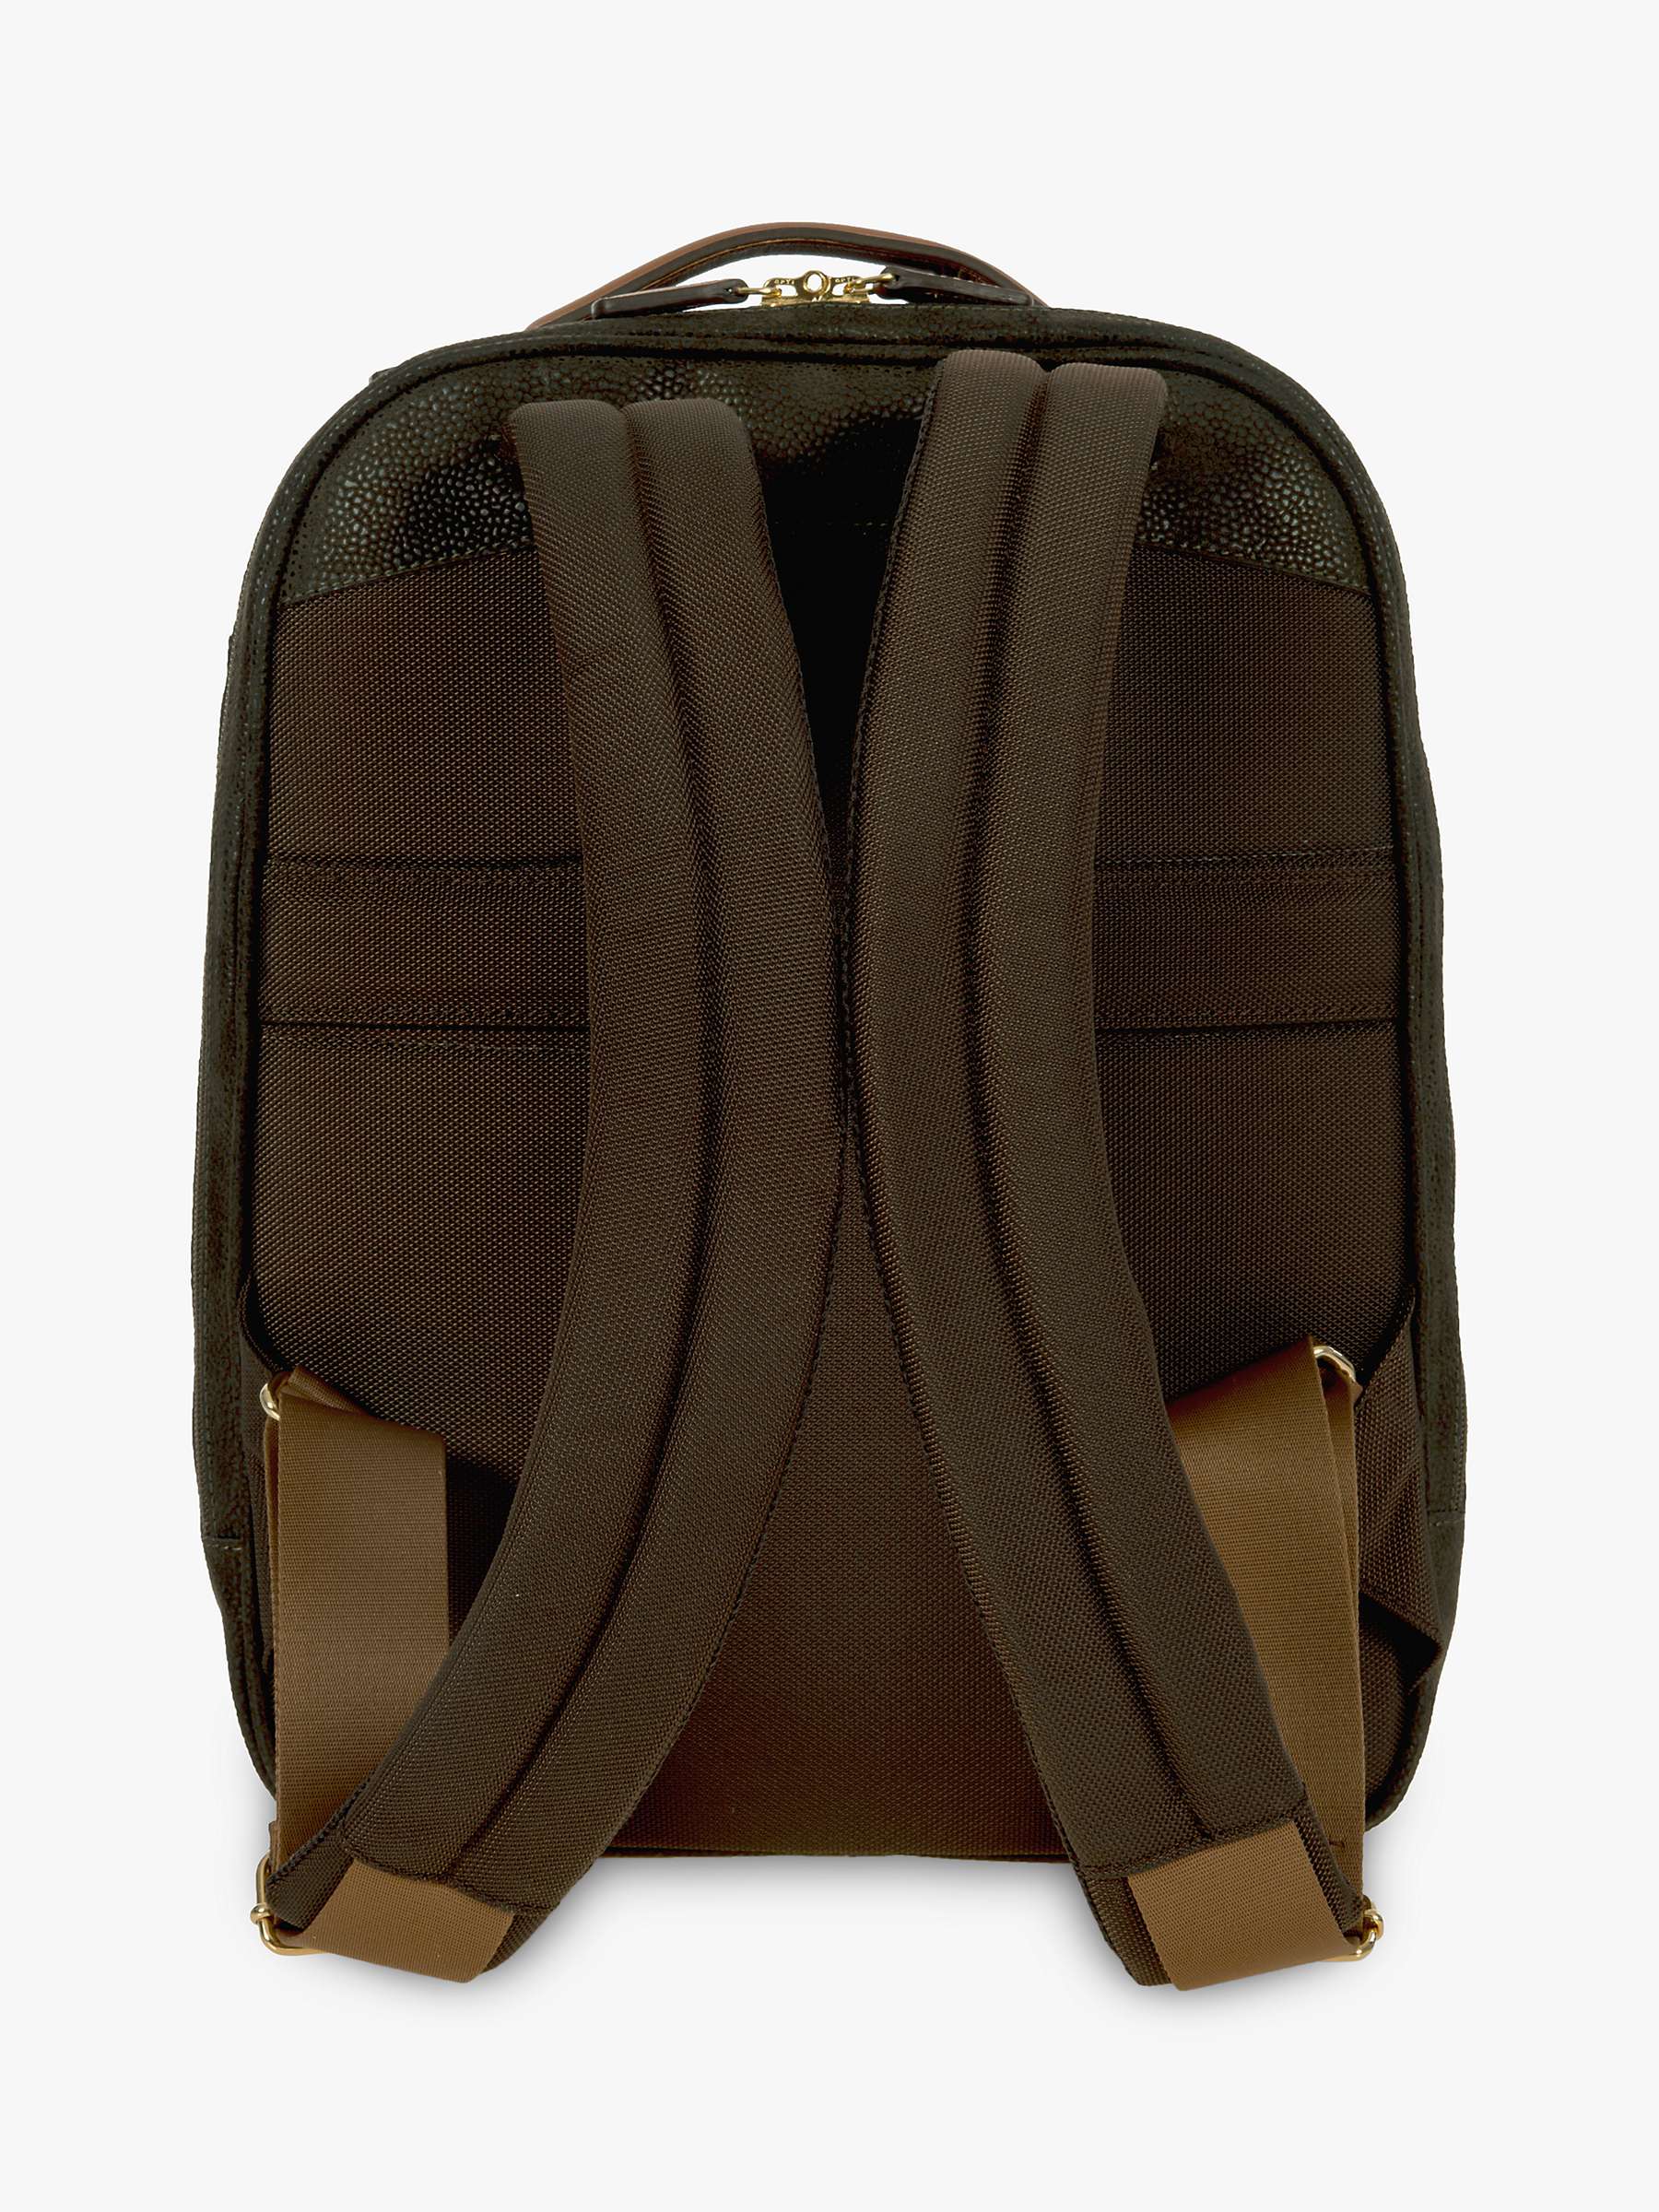 Buy Bric's Life Backpack Online at johnlewis.com